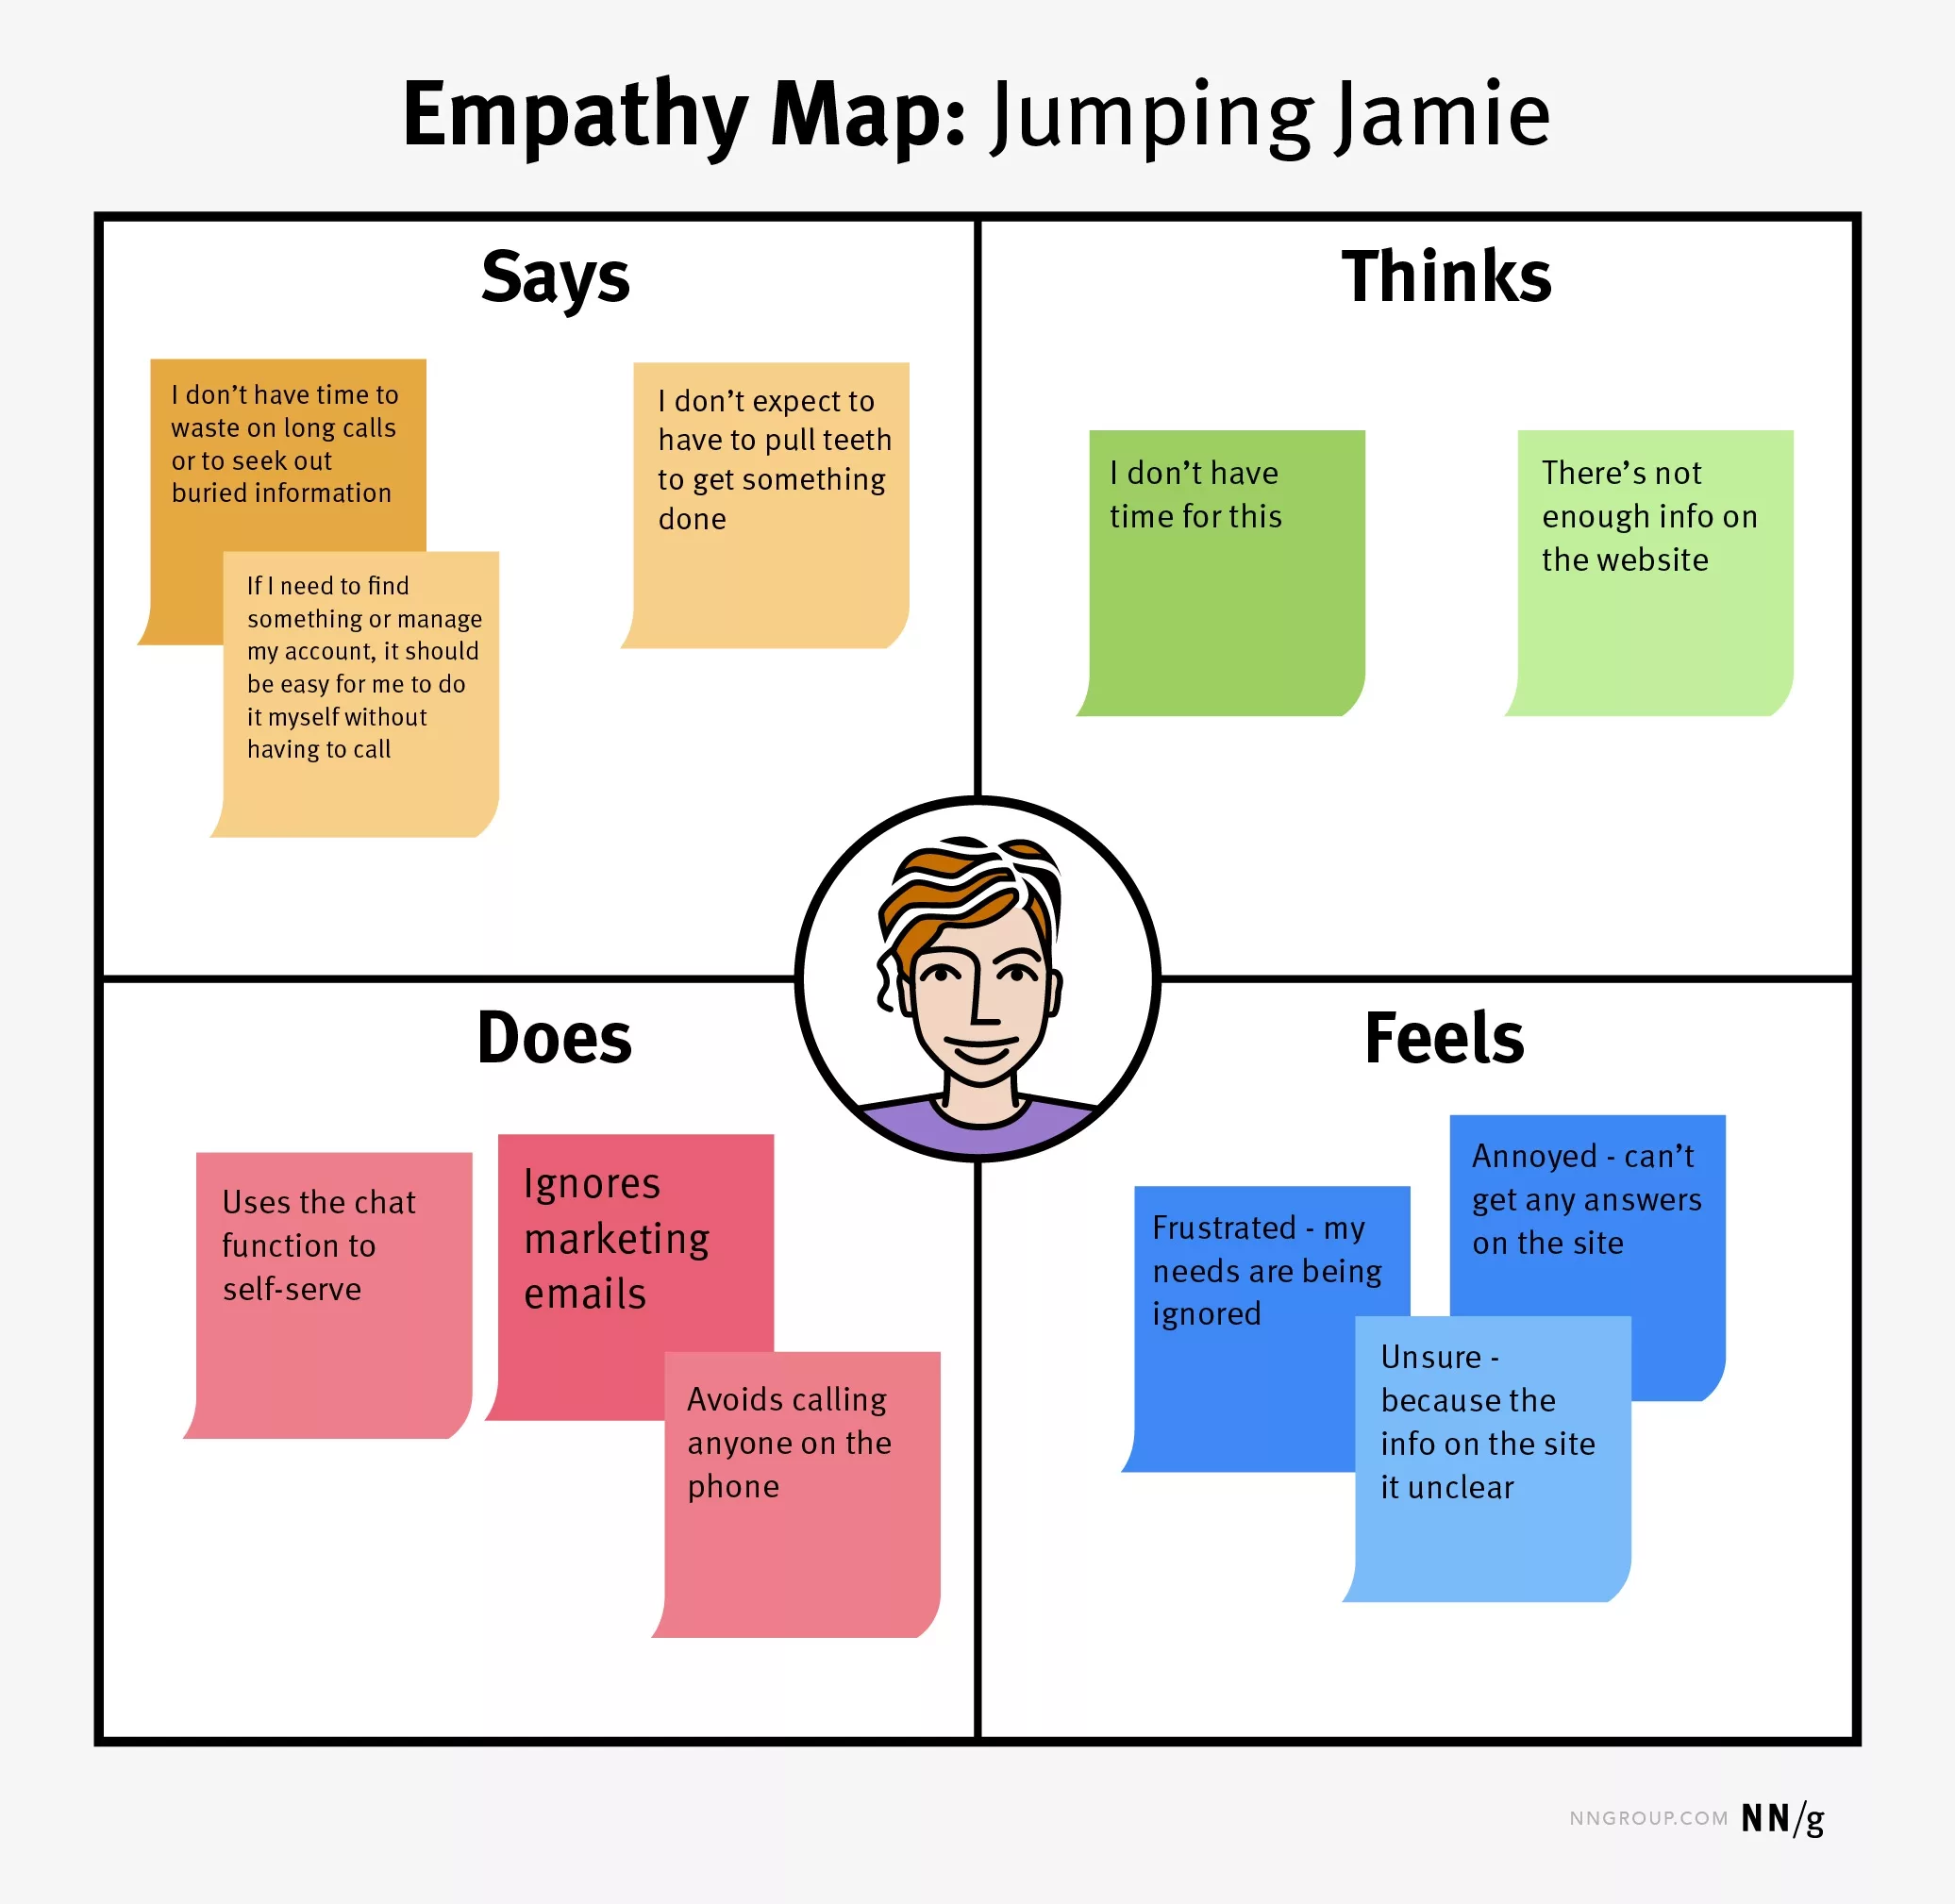 The Nielsen Normans Group's example of an Empathy Map for Jumping Jamie.